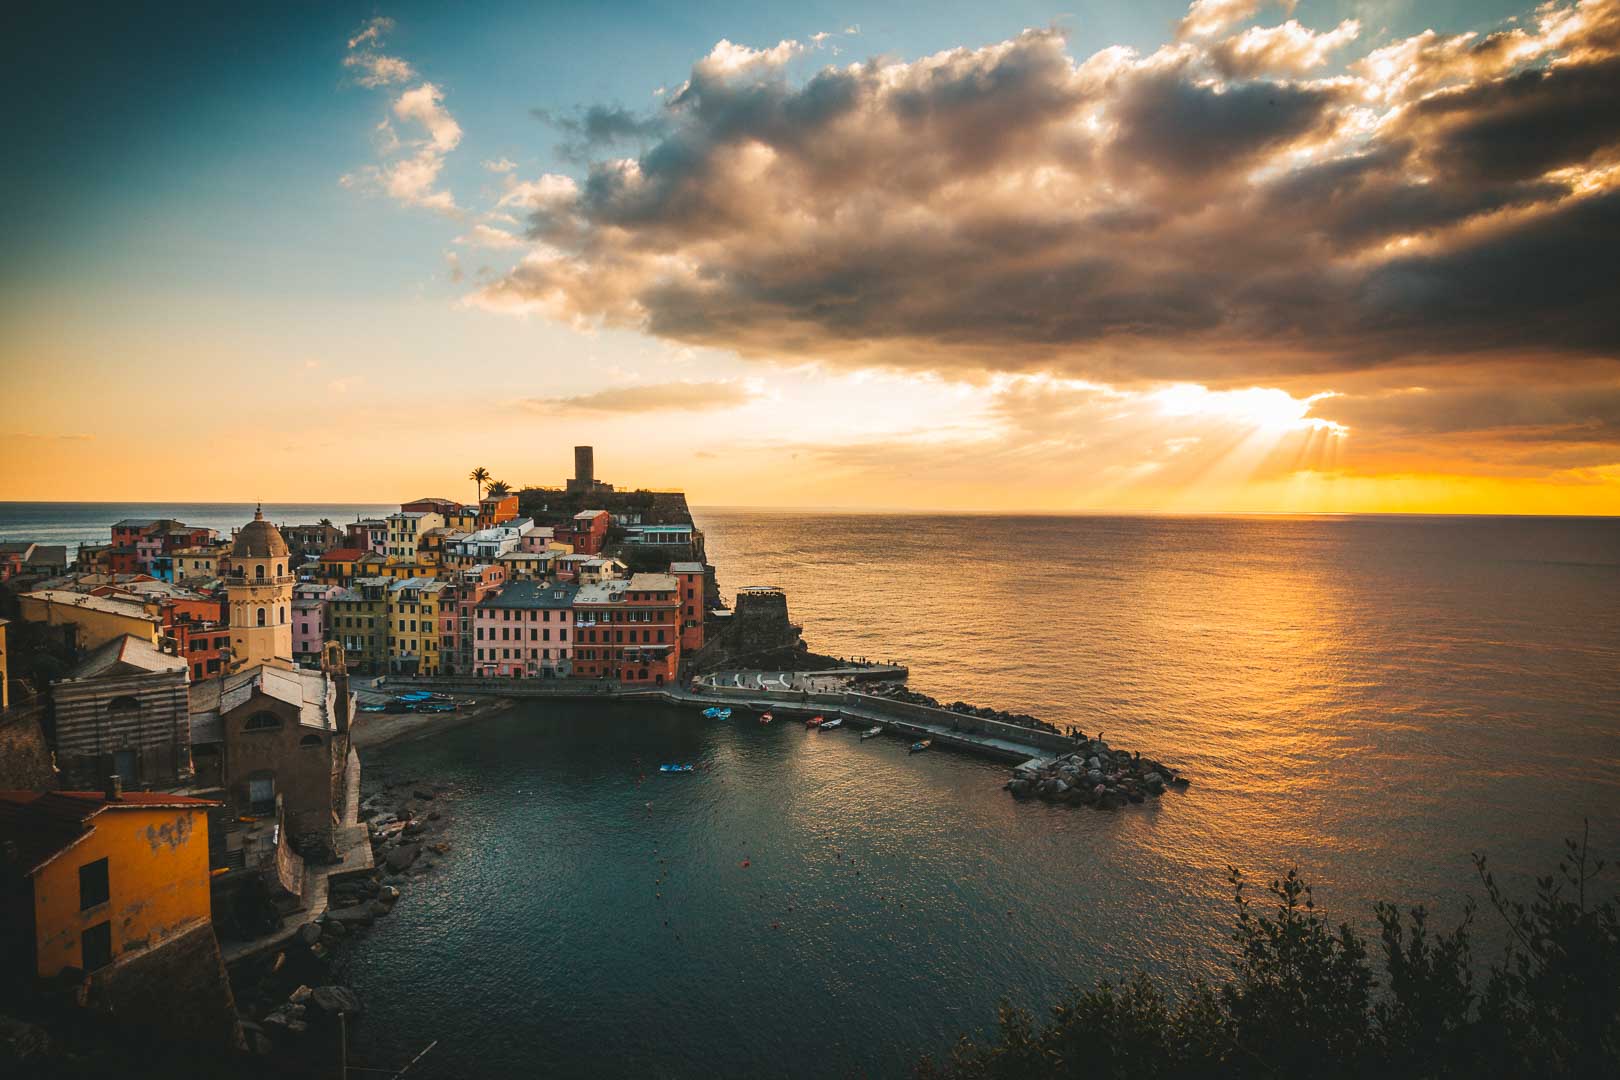 xatching the sun set from a vernazza boat tour